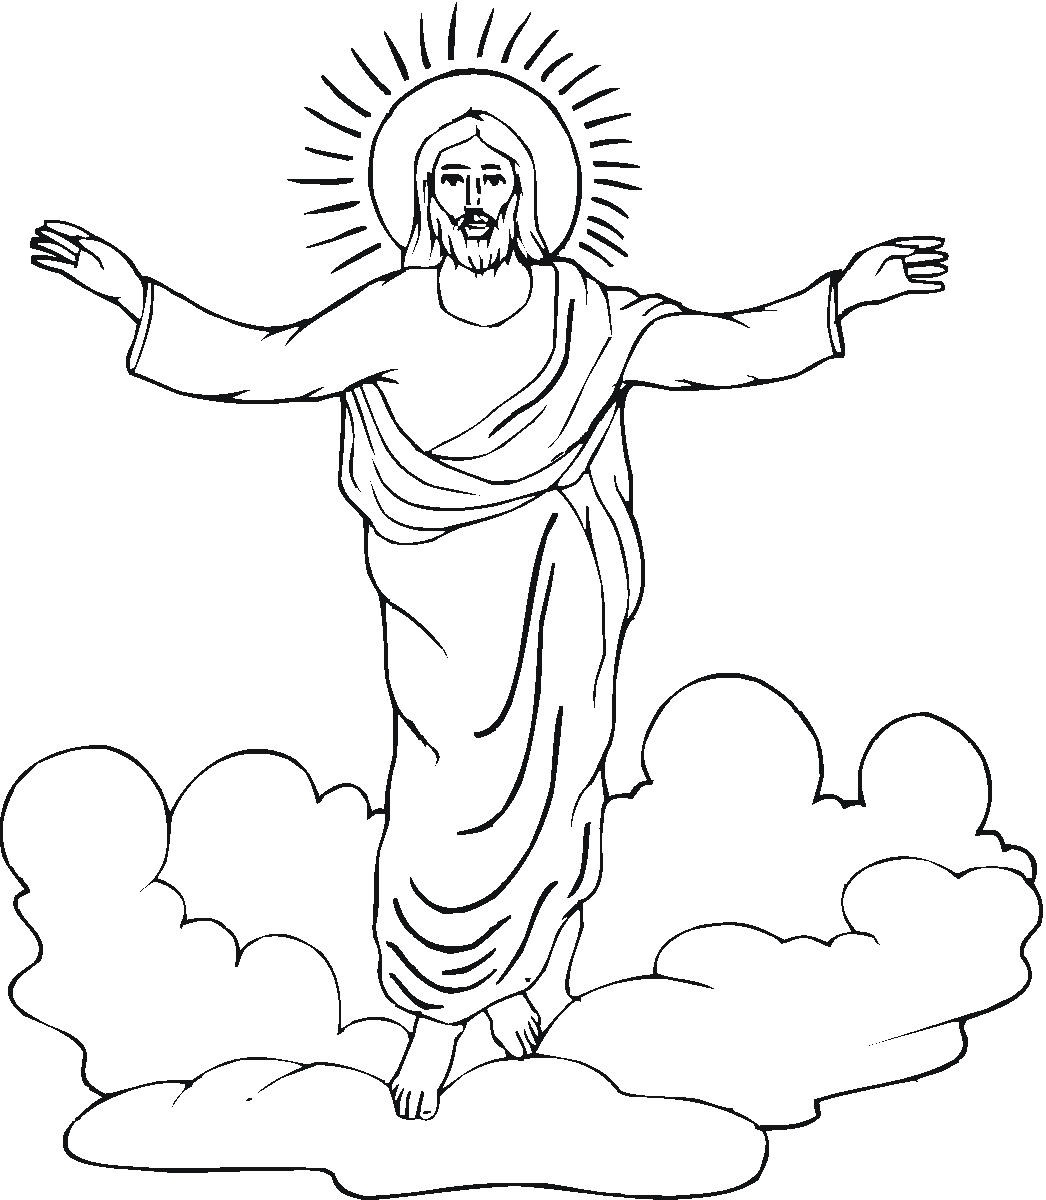 Download EASTER COLOURING: RELIGIOUS EASTER COLORING PICTURE